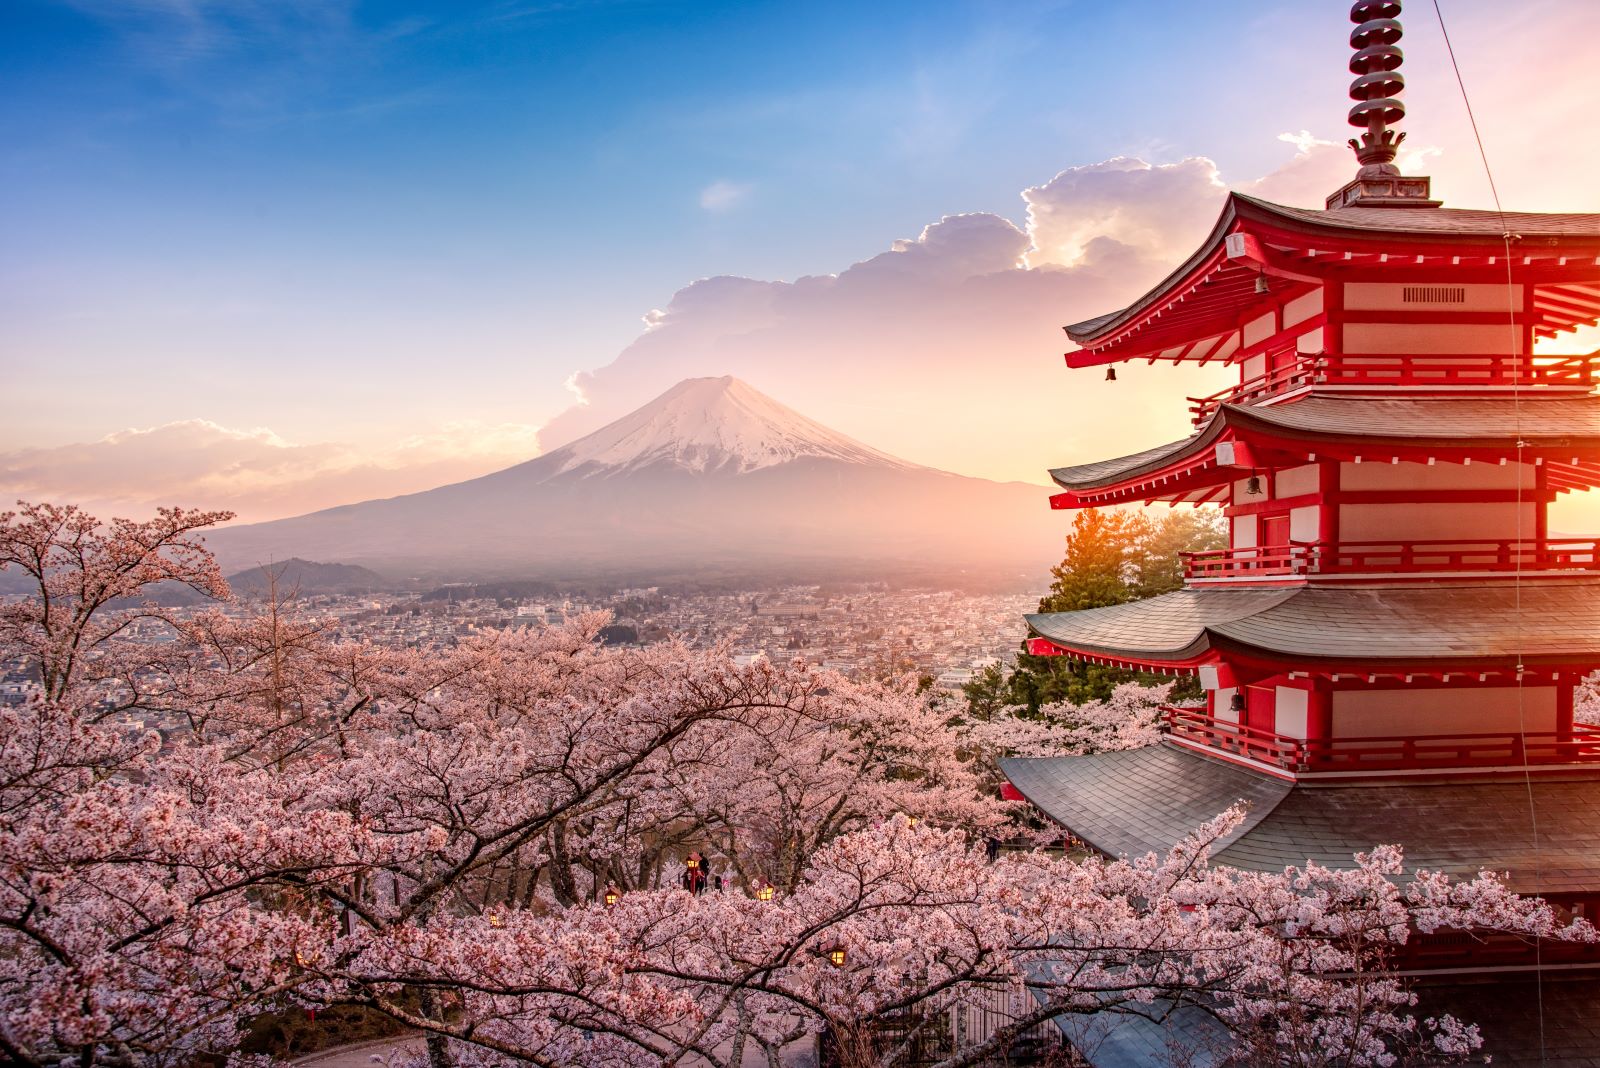 <p class="wp-caption-text">Image credit: Shutterstock / Travel mania</p>  <p><span>Japan offers a blend of tradition and futurism. The JET Program is a popular pathway for teaching English, offering a unique cultural immersion. Mind the etiquette and embrace the opportunity to live in one of the world’s most fascinating cultures.</span></p>